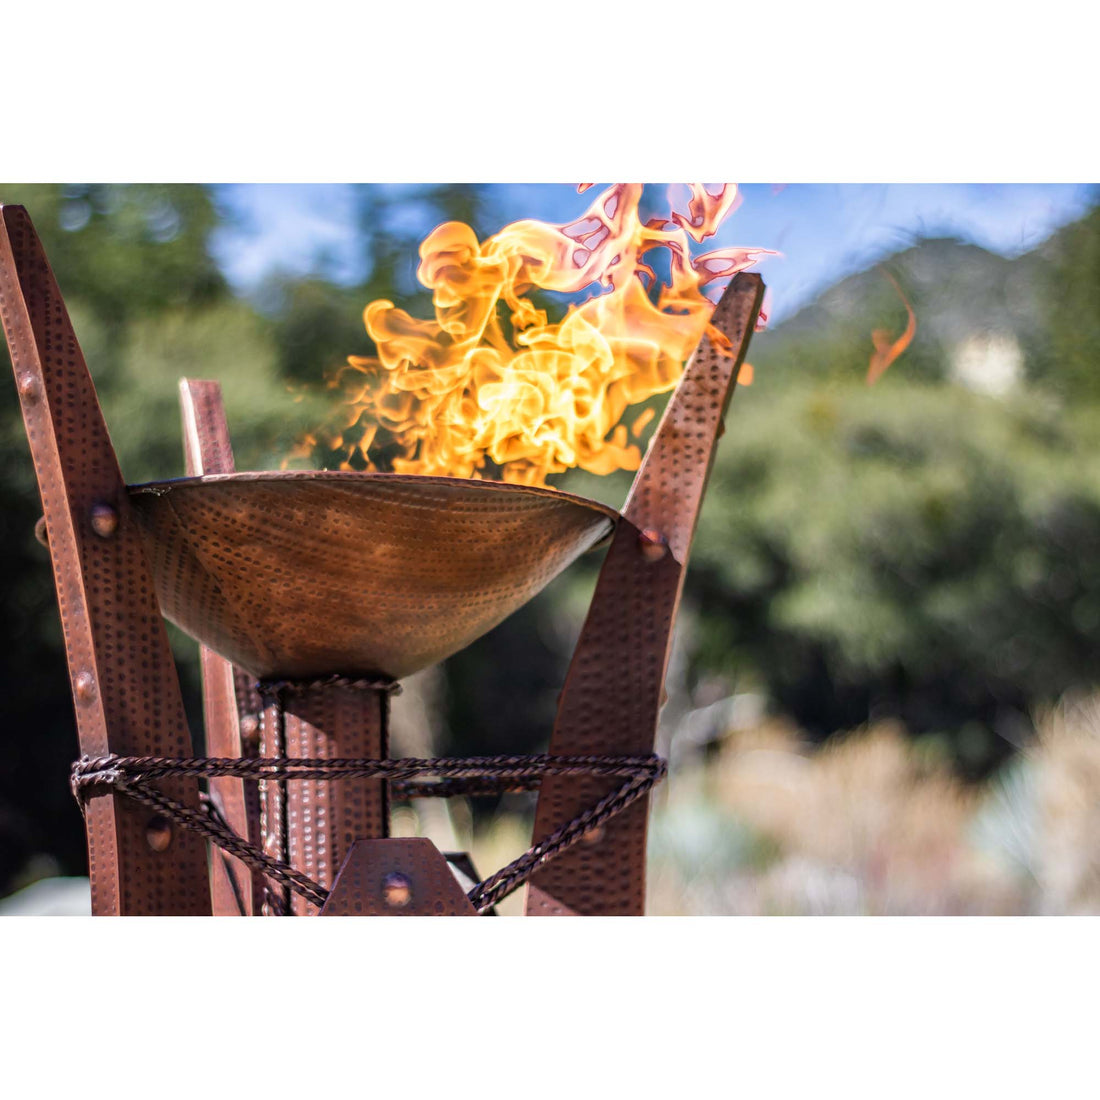 Fire Towers vs Tiki Torches: Which One Is Right for Your Outdoor Space?